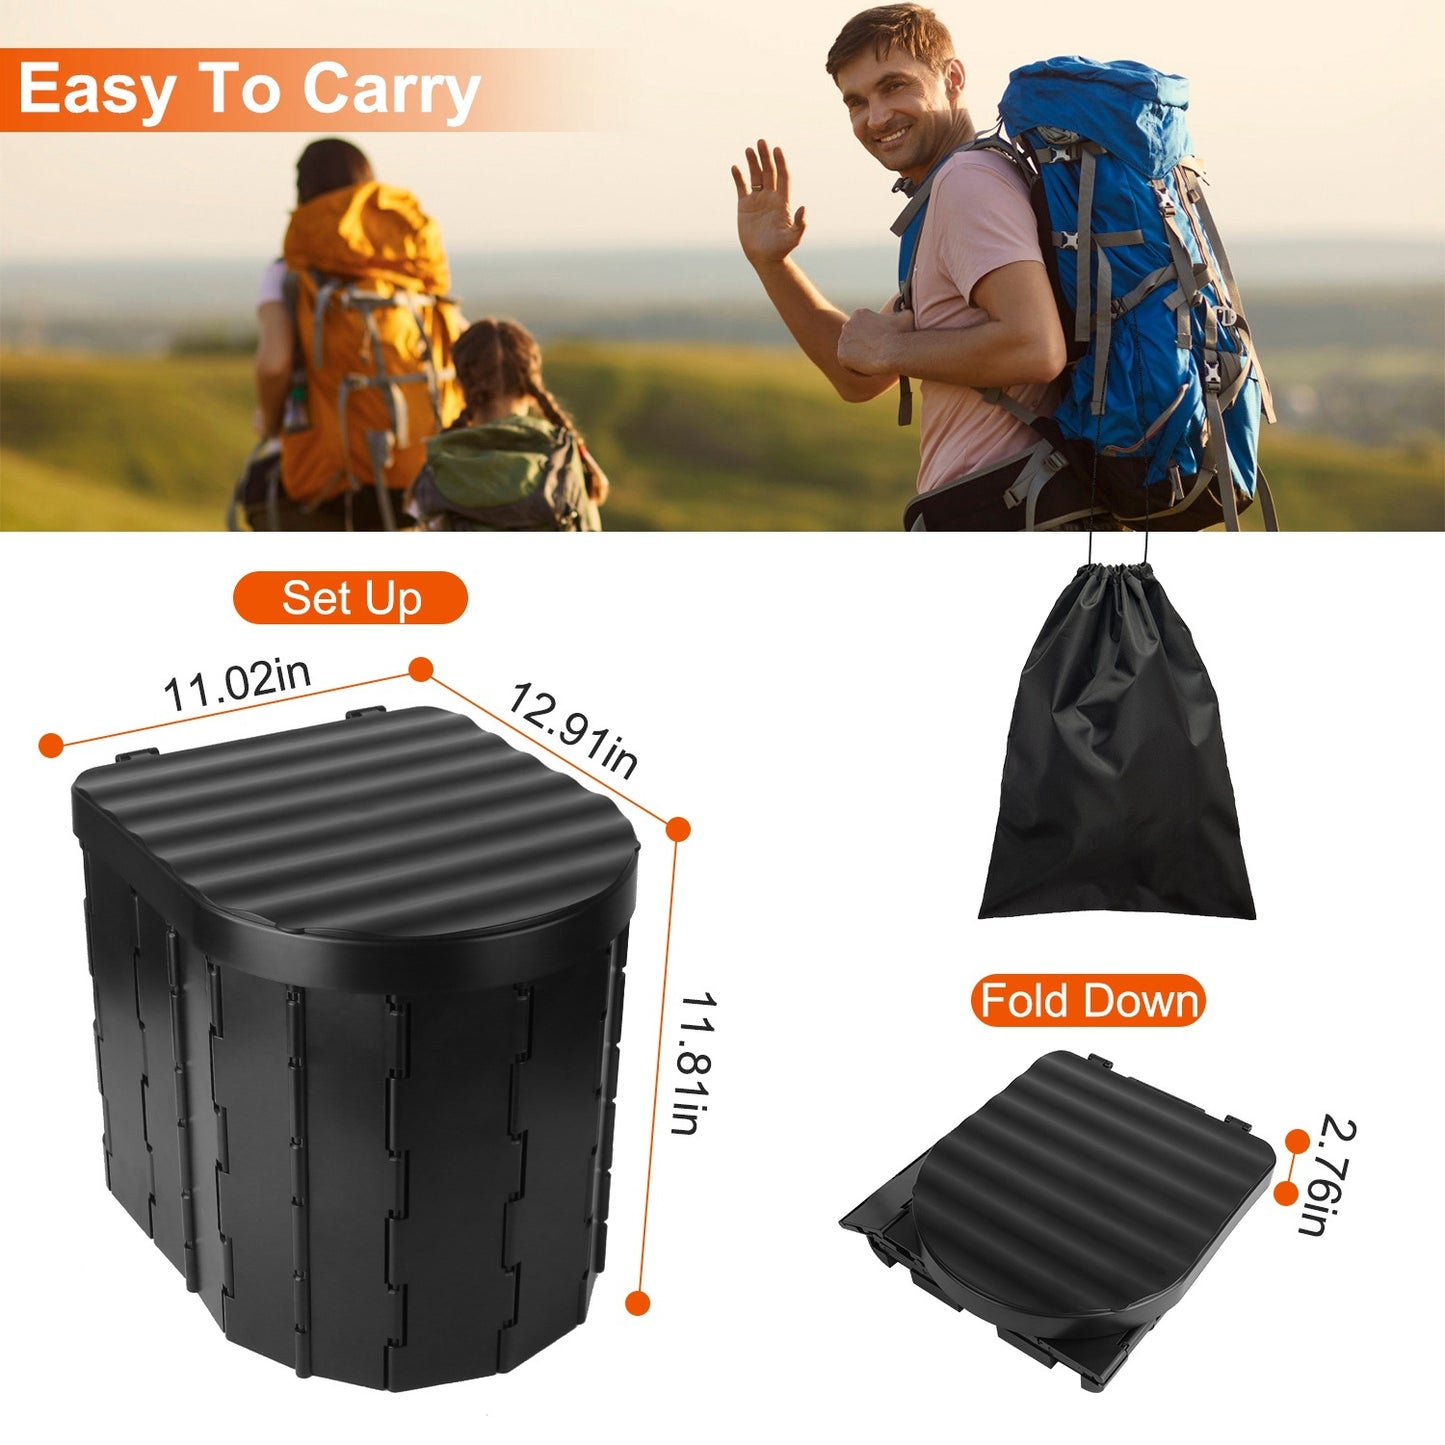 Foldable Emergency Toilet Portable Porta Potty for Traveling/ with Lid Carry Bag 1 Roll Garbage Bags